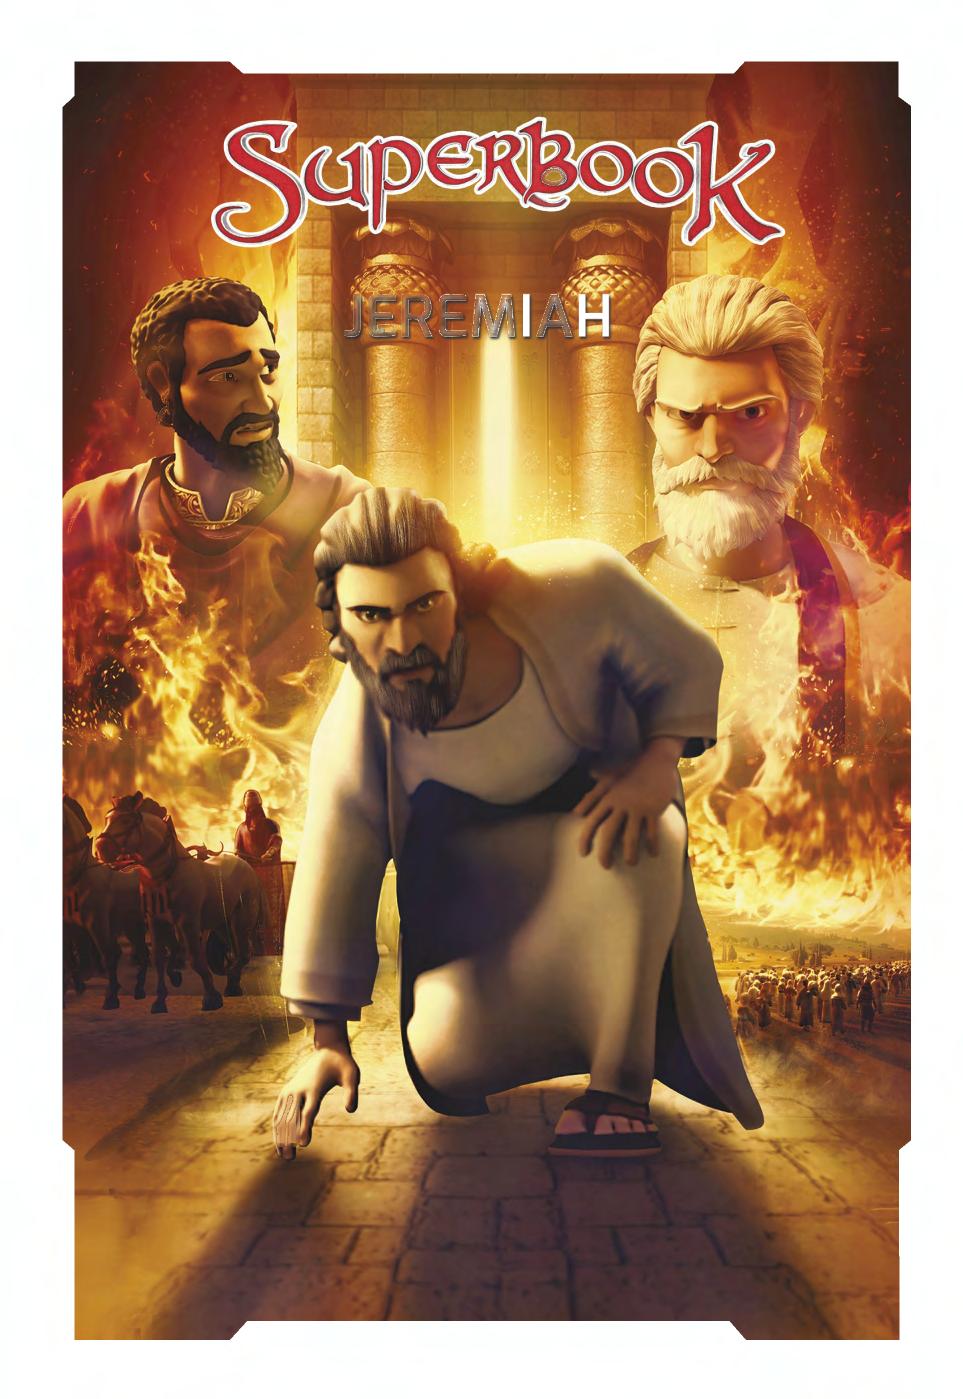 FA M I LY D I S C U S S I O N G U I D E A message from Superbook s Executive Producer Dear Friend, Jeremiah follows the biblical narrative of an Old Testament prophet who faithfully proclaimed God s